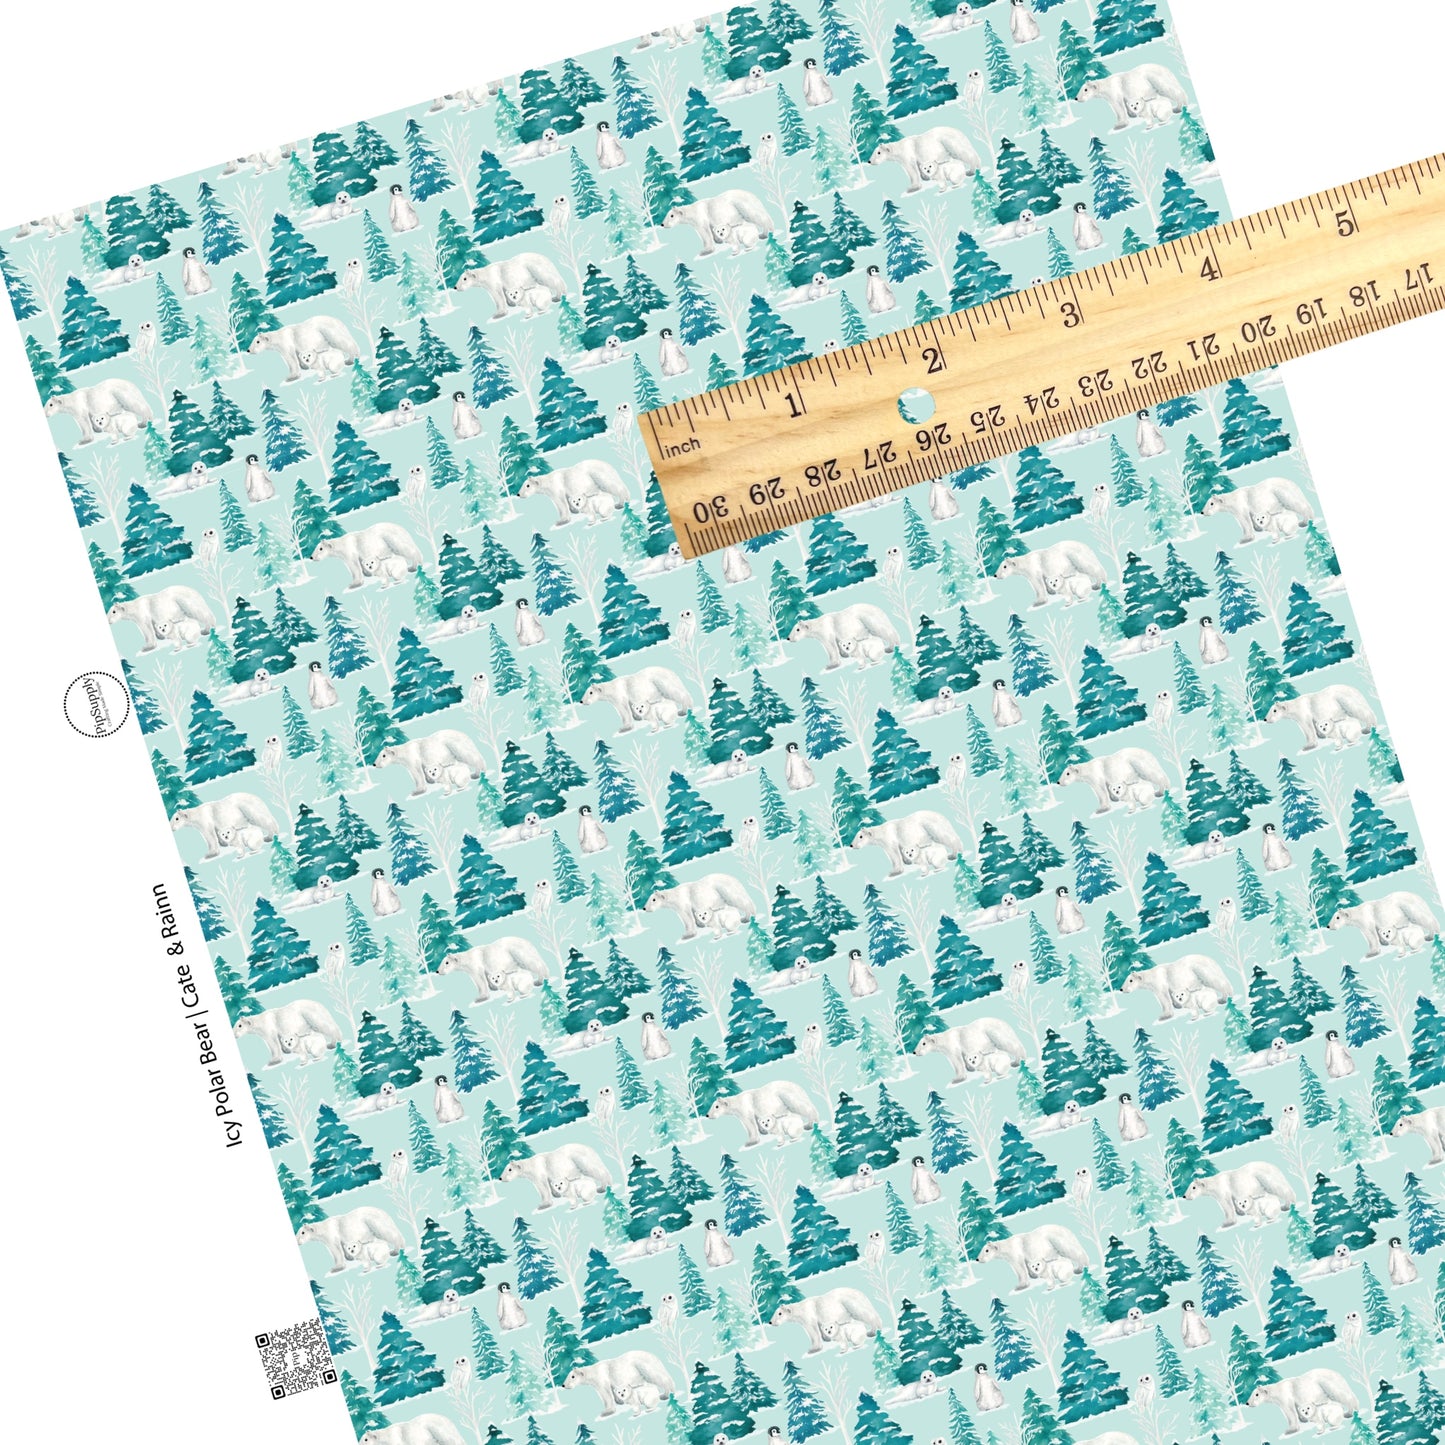 Polar bears, penguins, owls, and snowy trees on light blue faux leather sheets